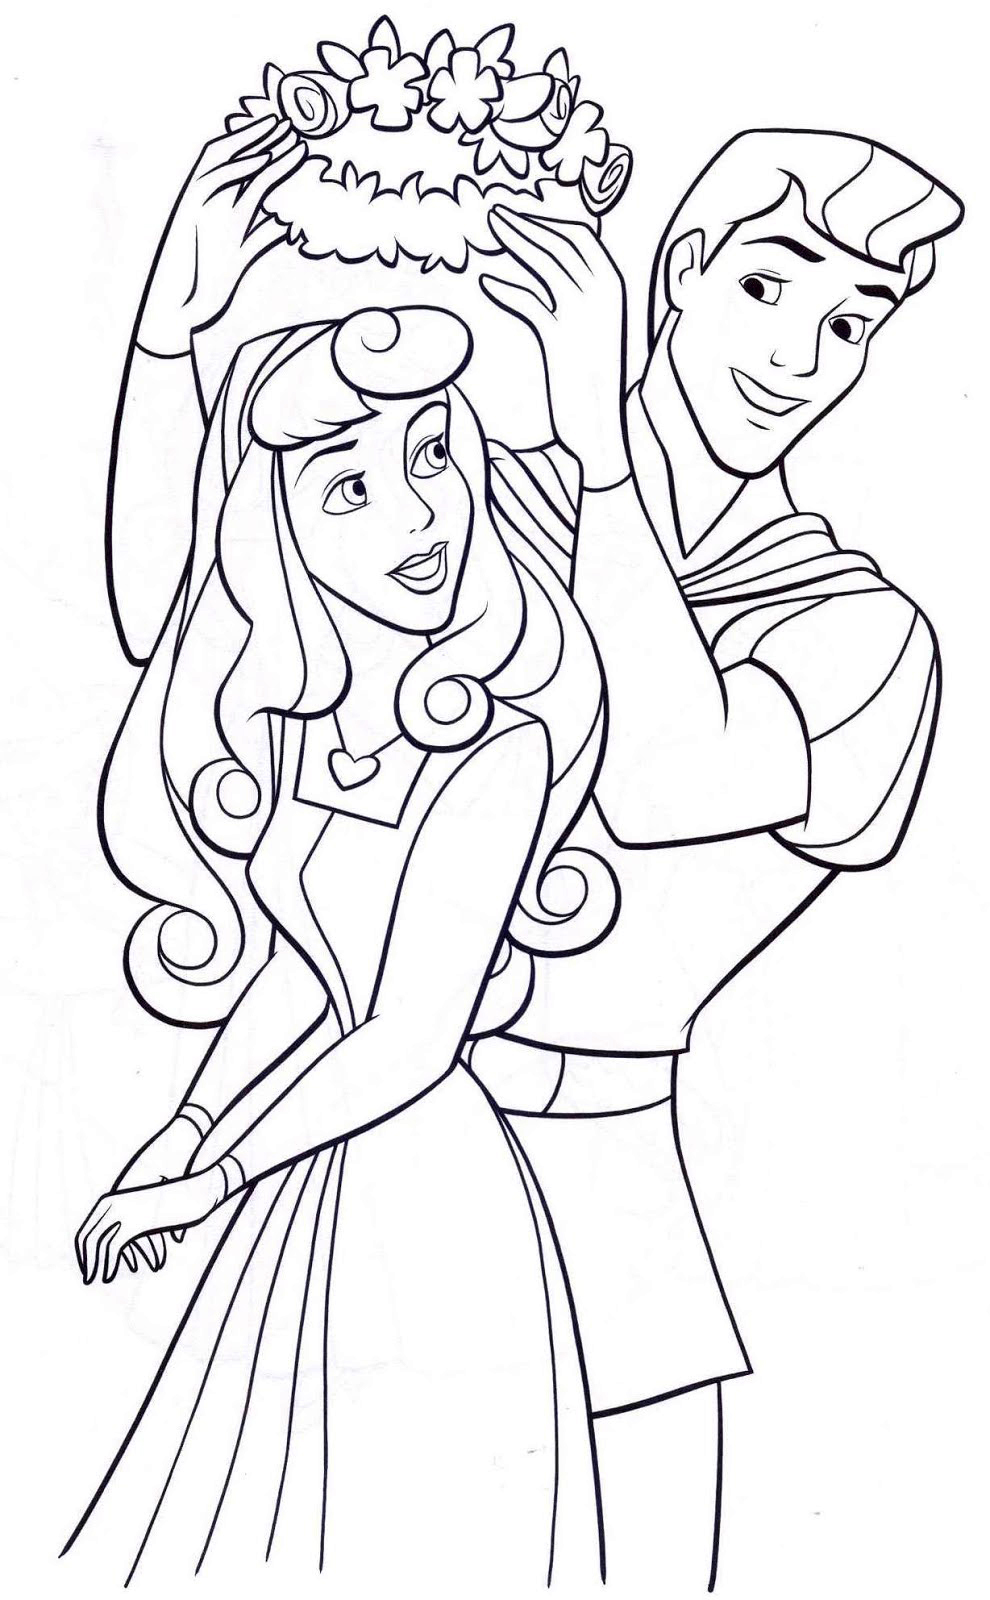 Princess Coloring Pages Best Coloring Pages For Kids Coloring Wallpapers Download Free Images Wallpaper [coloring436.blogspot.com]